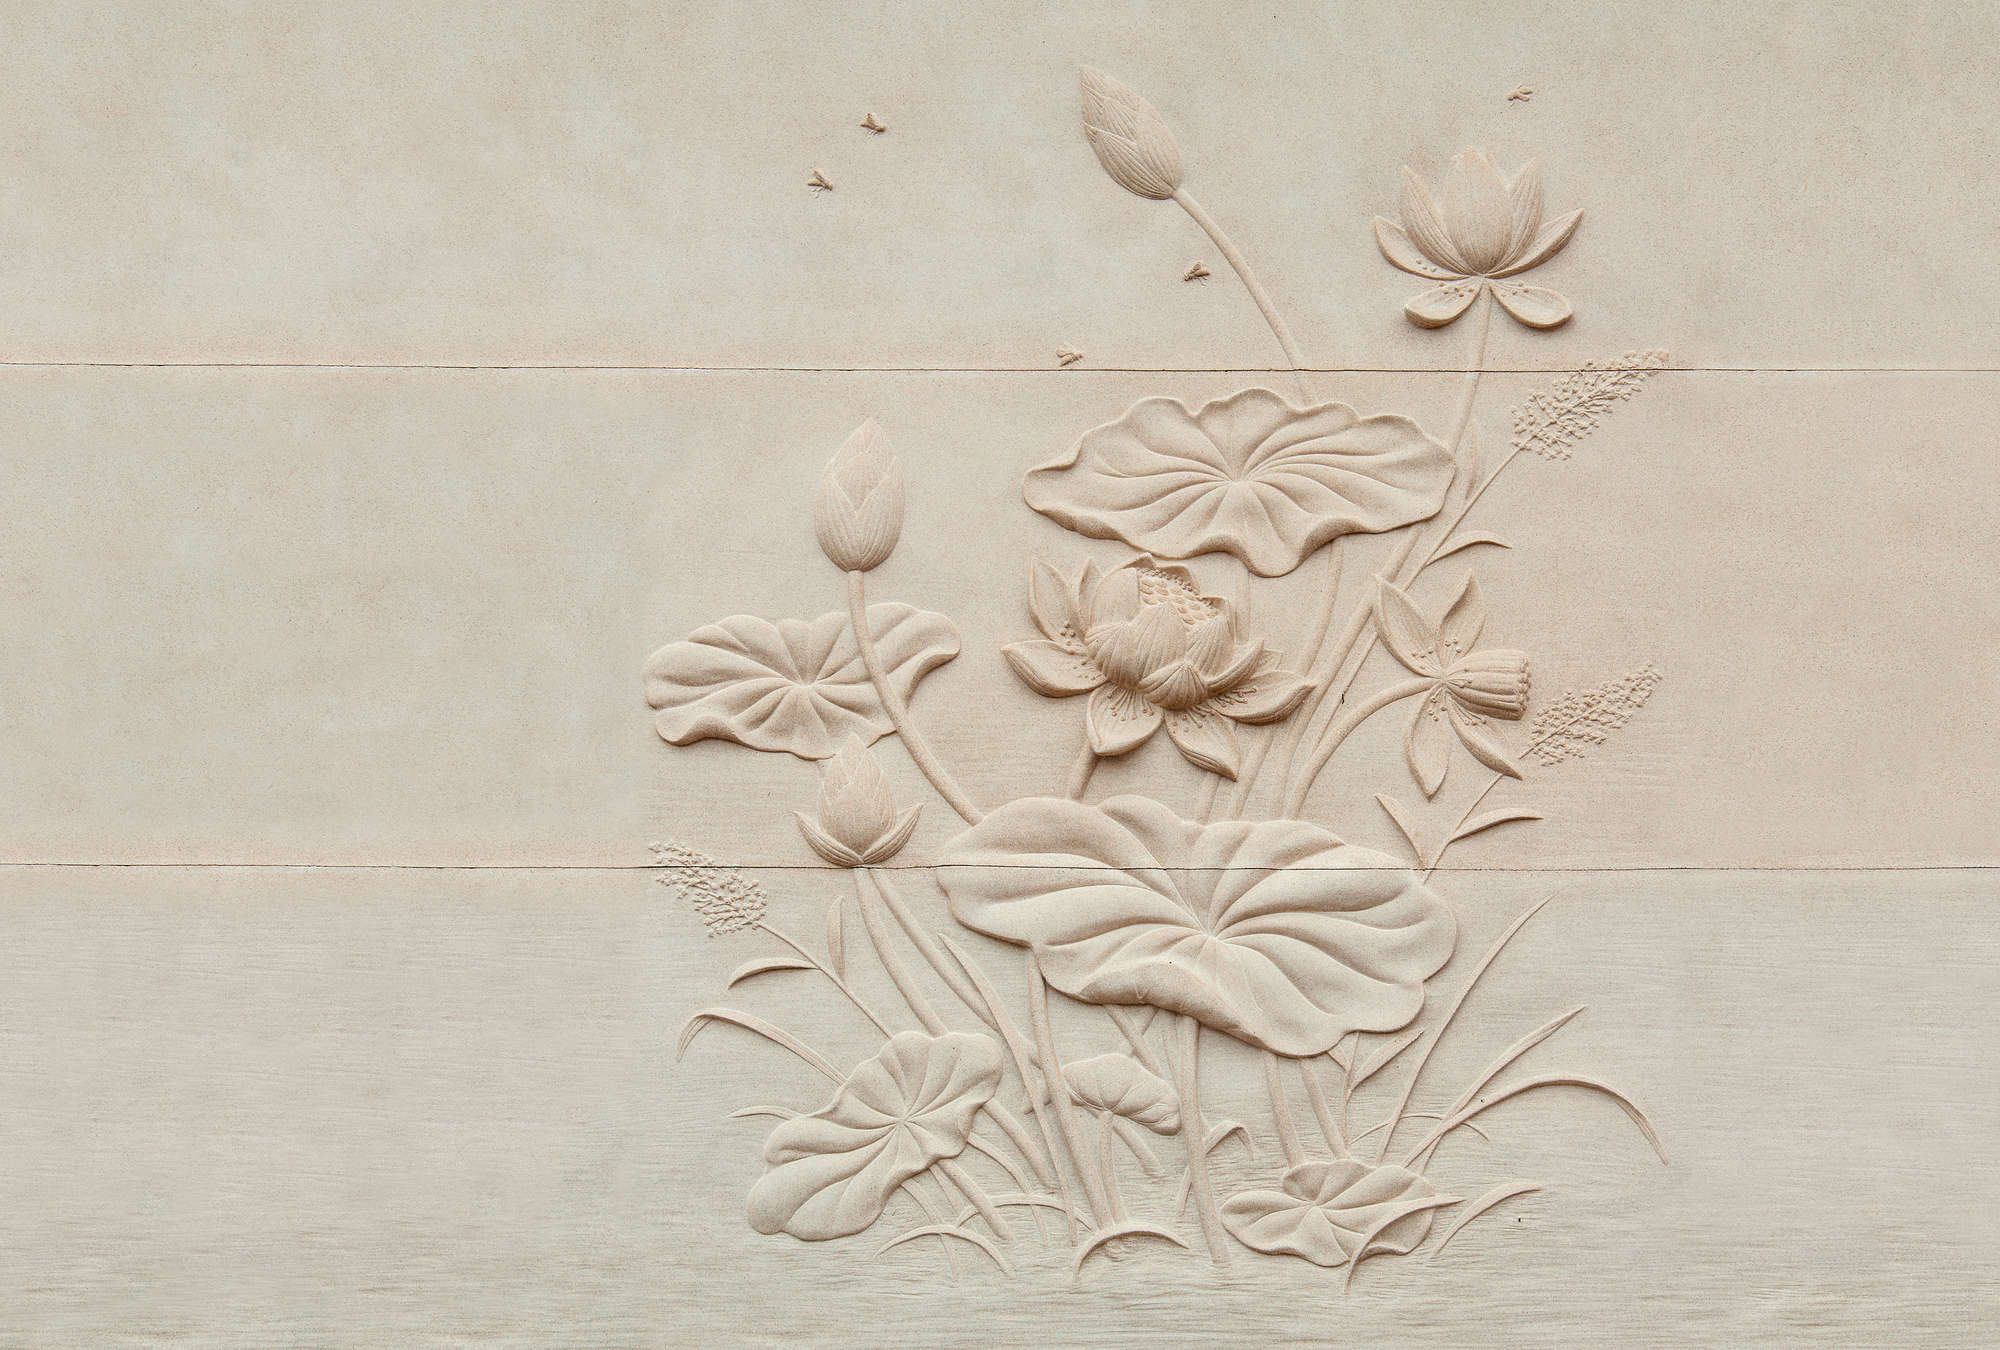             Photo wallpaper »fiore« - Floral relief on concrete structure - Smooth, slightly pearlescent non-woven fabric
        